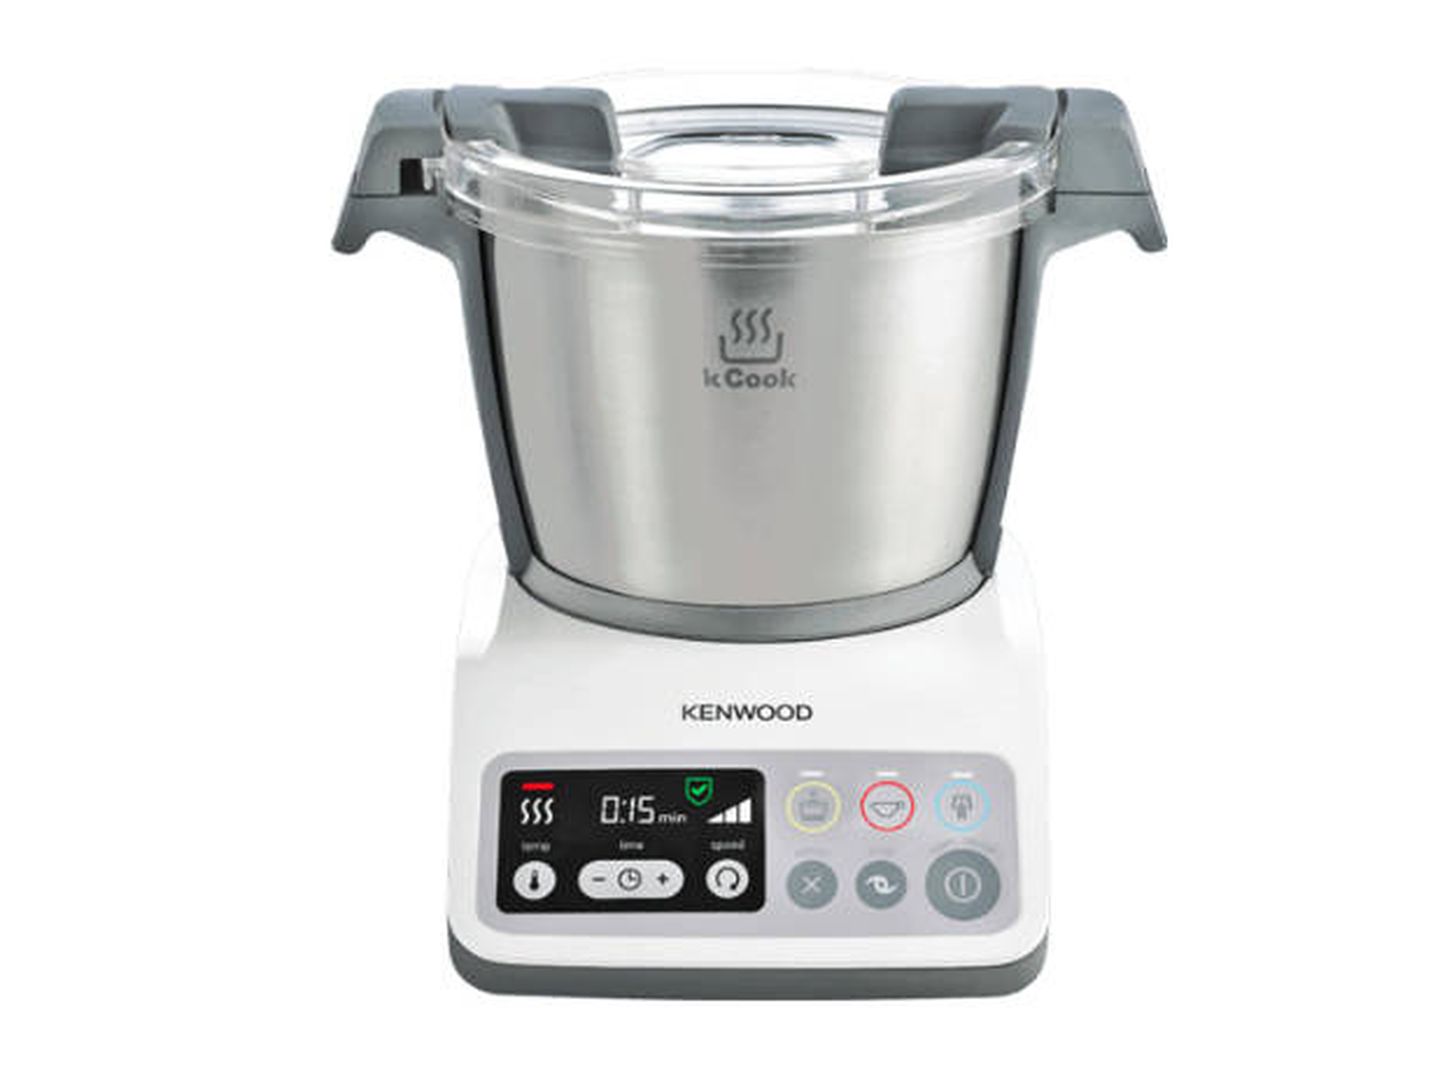 Kenwood CCC200WH KCOOK